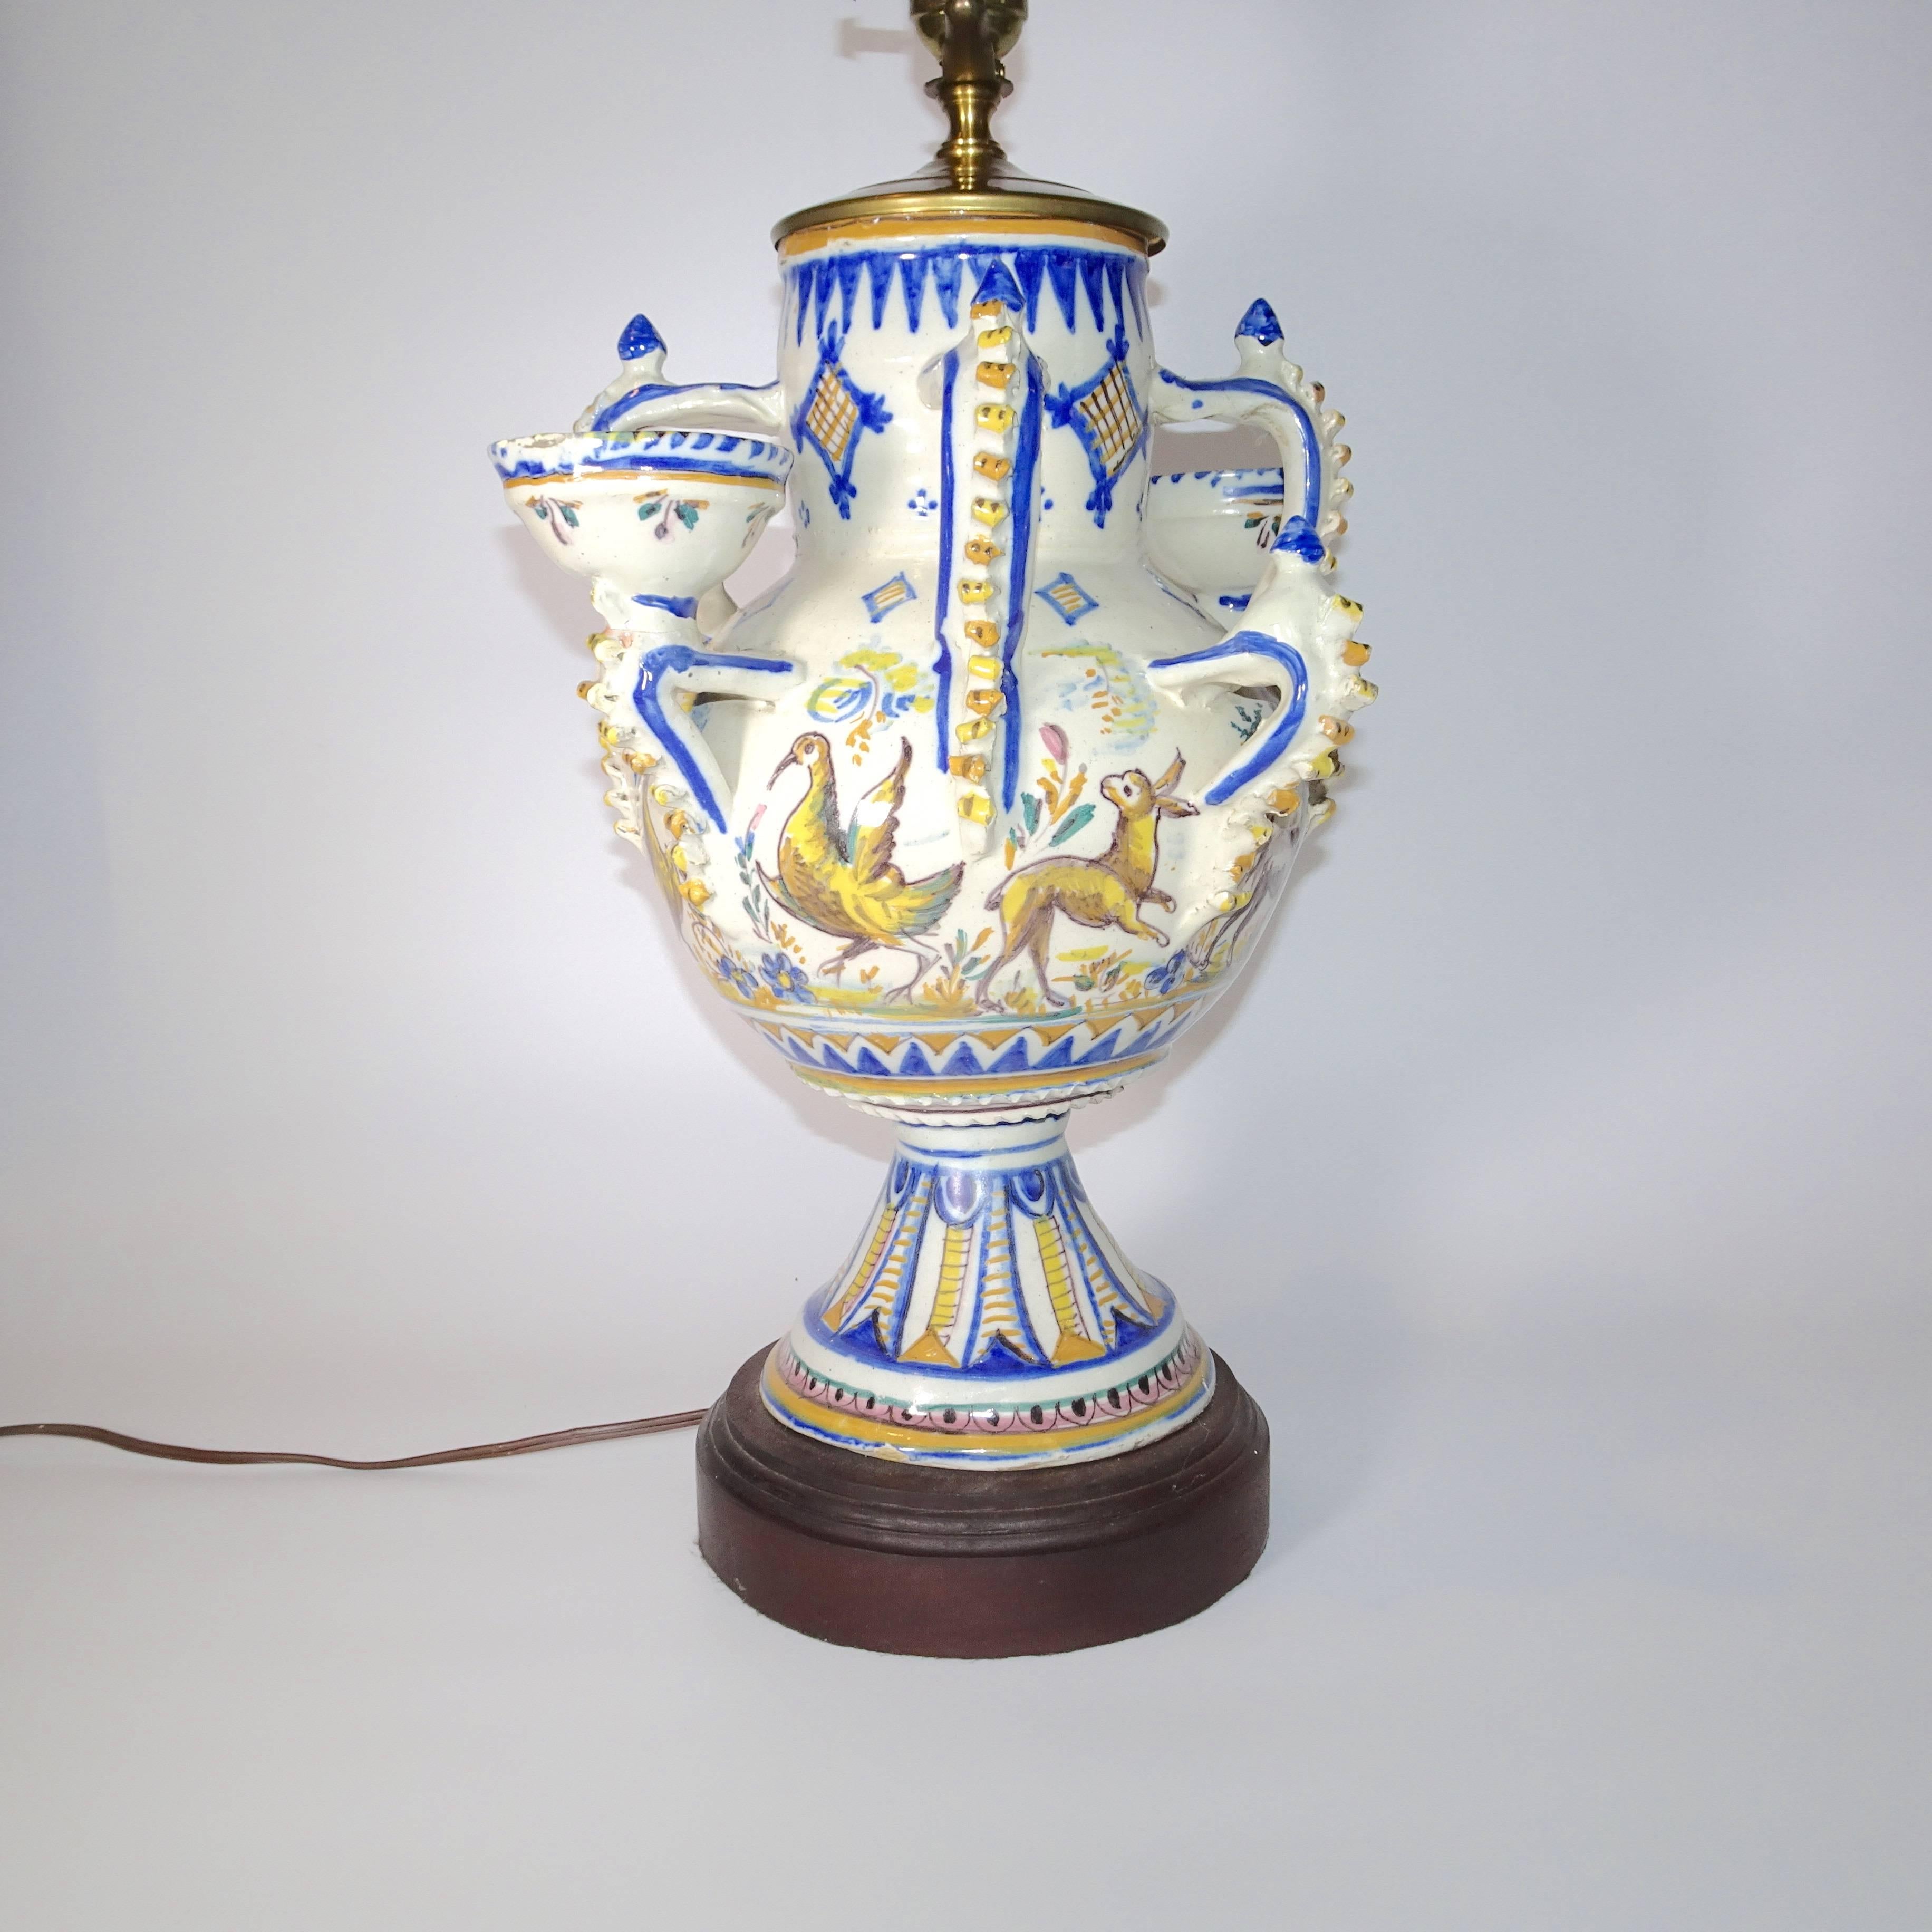 Dutch 19th Century Blue and White Delft Vase made into Table Lamp on Wood Base